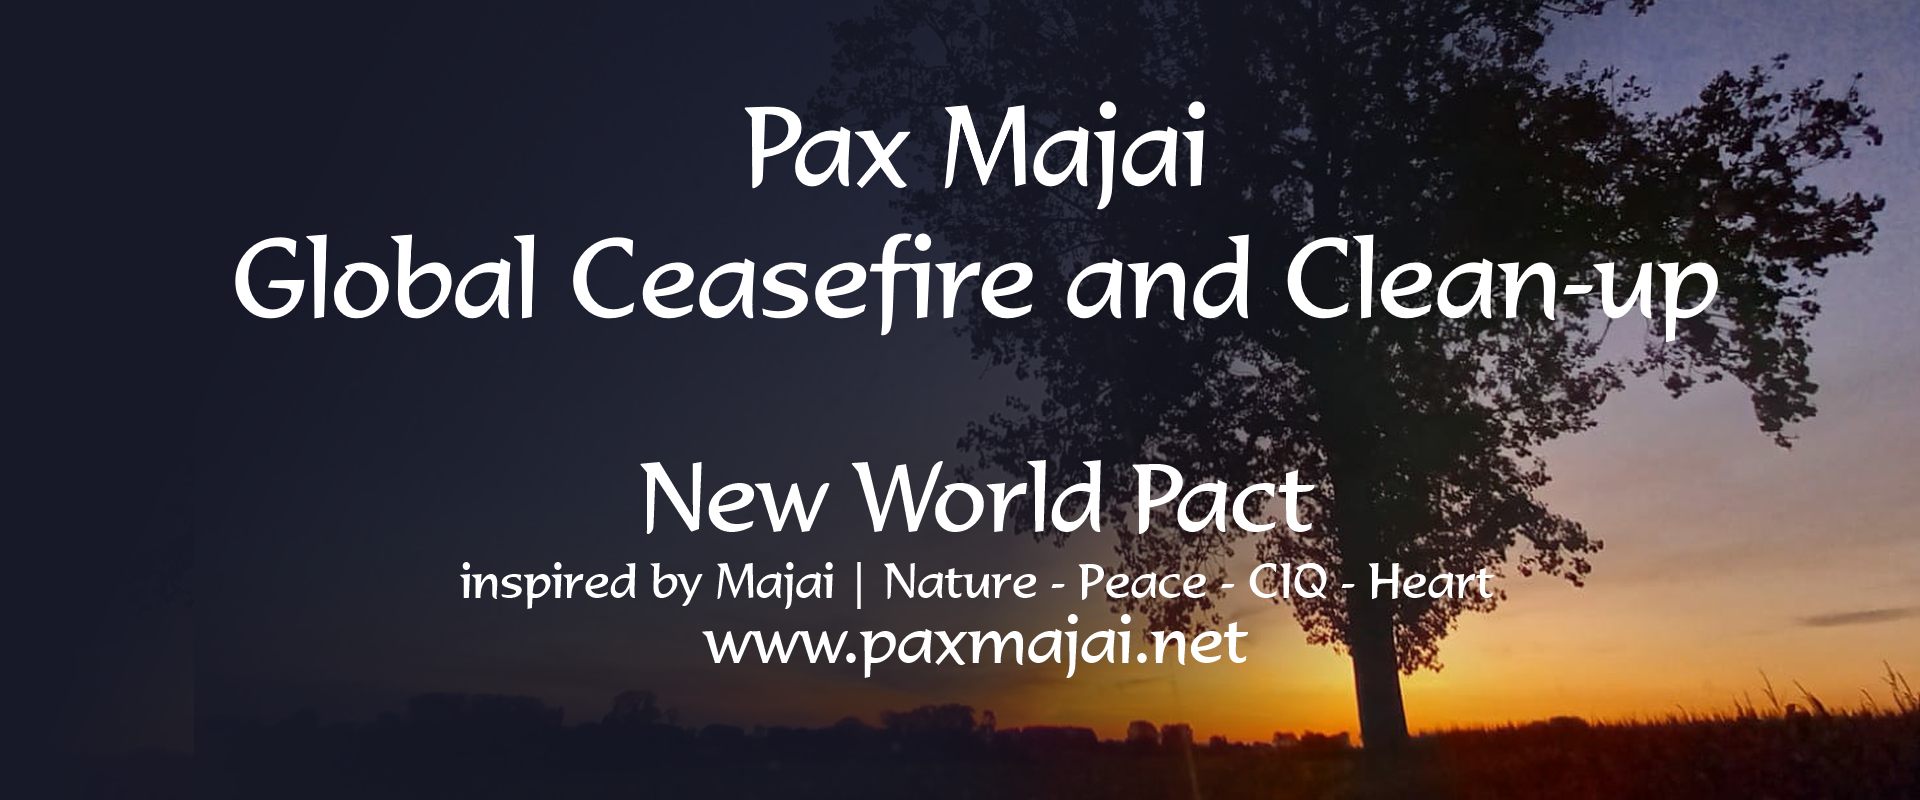 Pax Majai Ceasefire - Letter of Intent